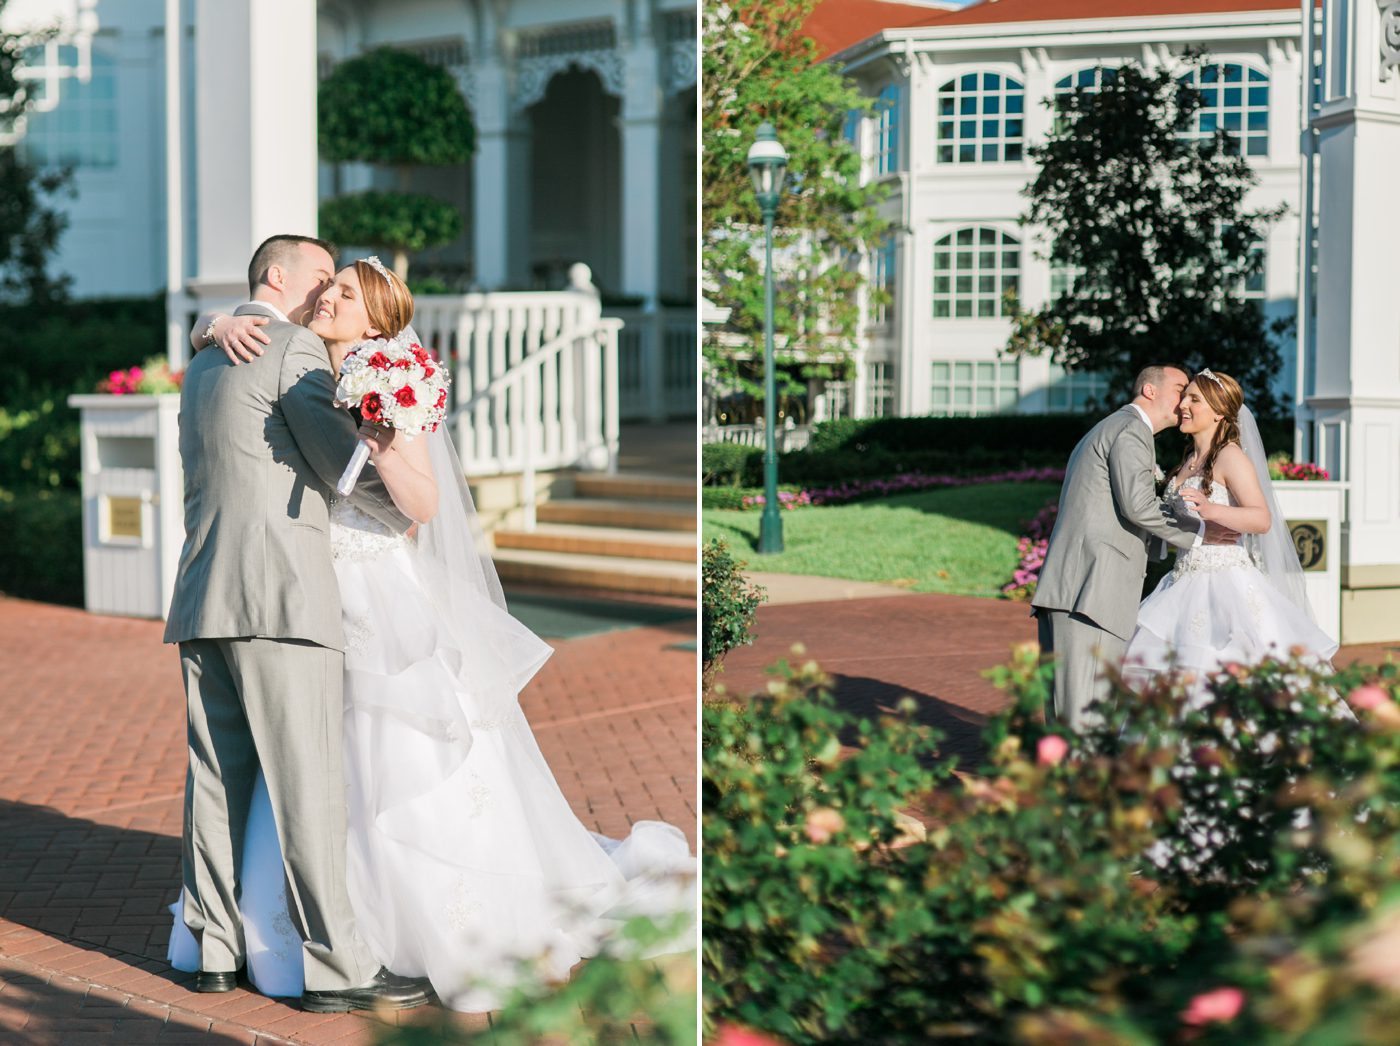 Bride and groom hugging during first look photos